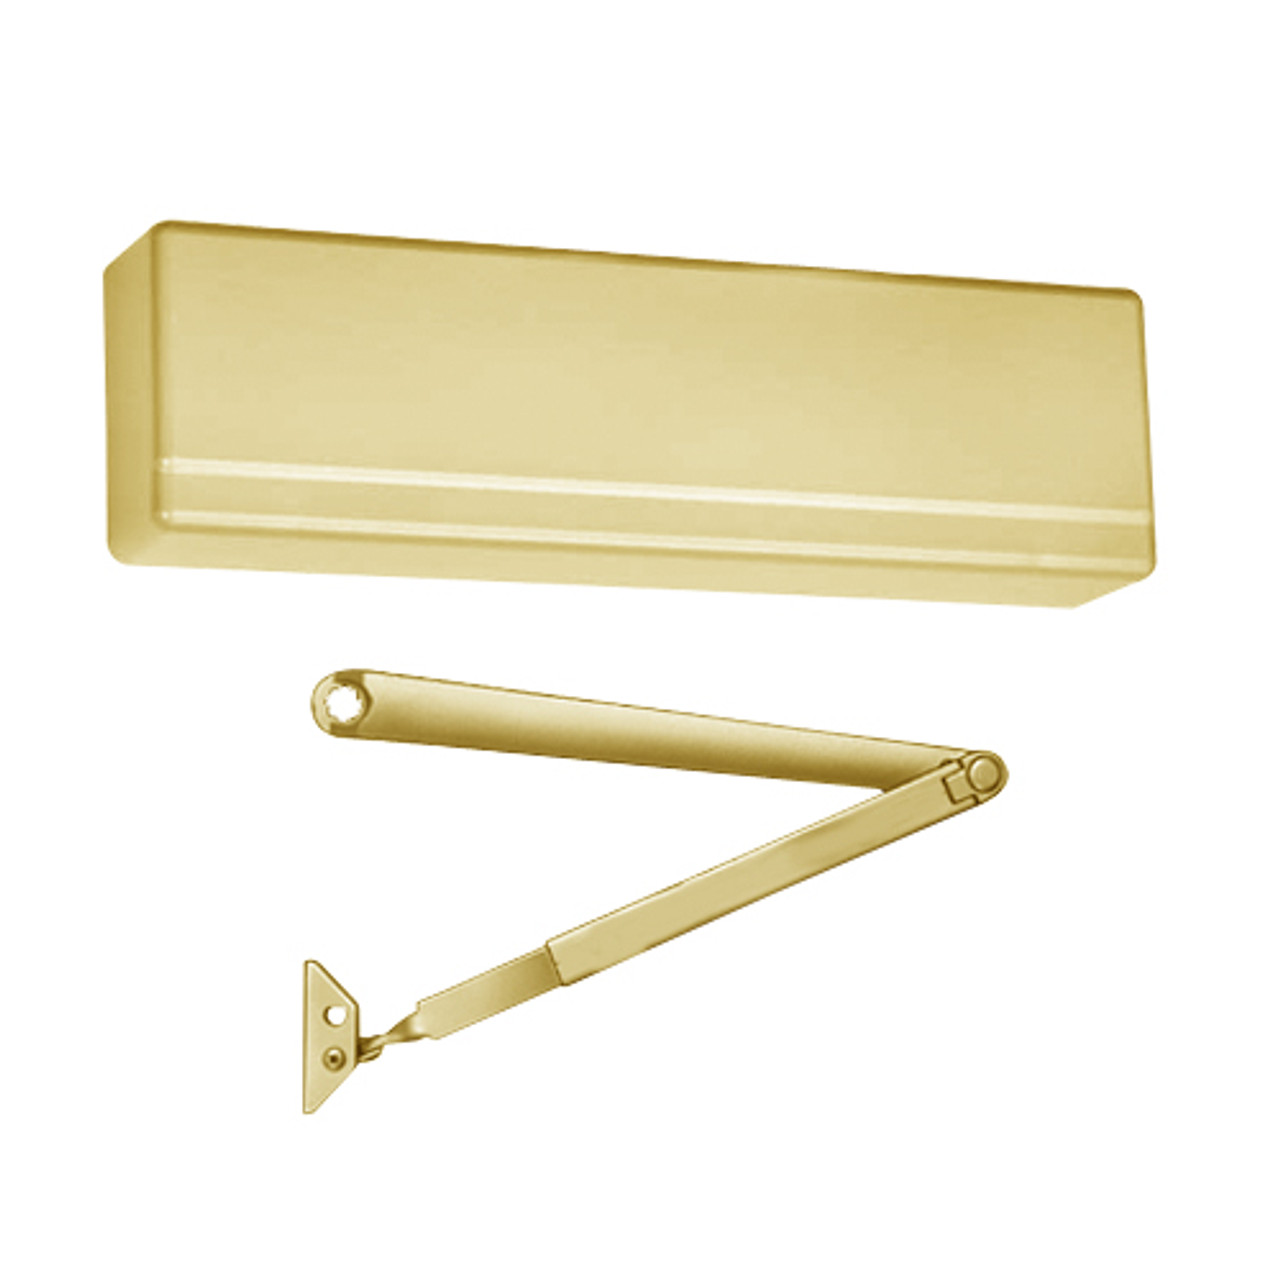 351-OLC-EAB Sargent 351 Series Powerglide Door Closer with Regular Duty Standard Arm for Low Ceiling in Brass Powder Coat